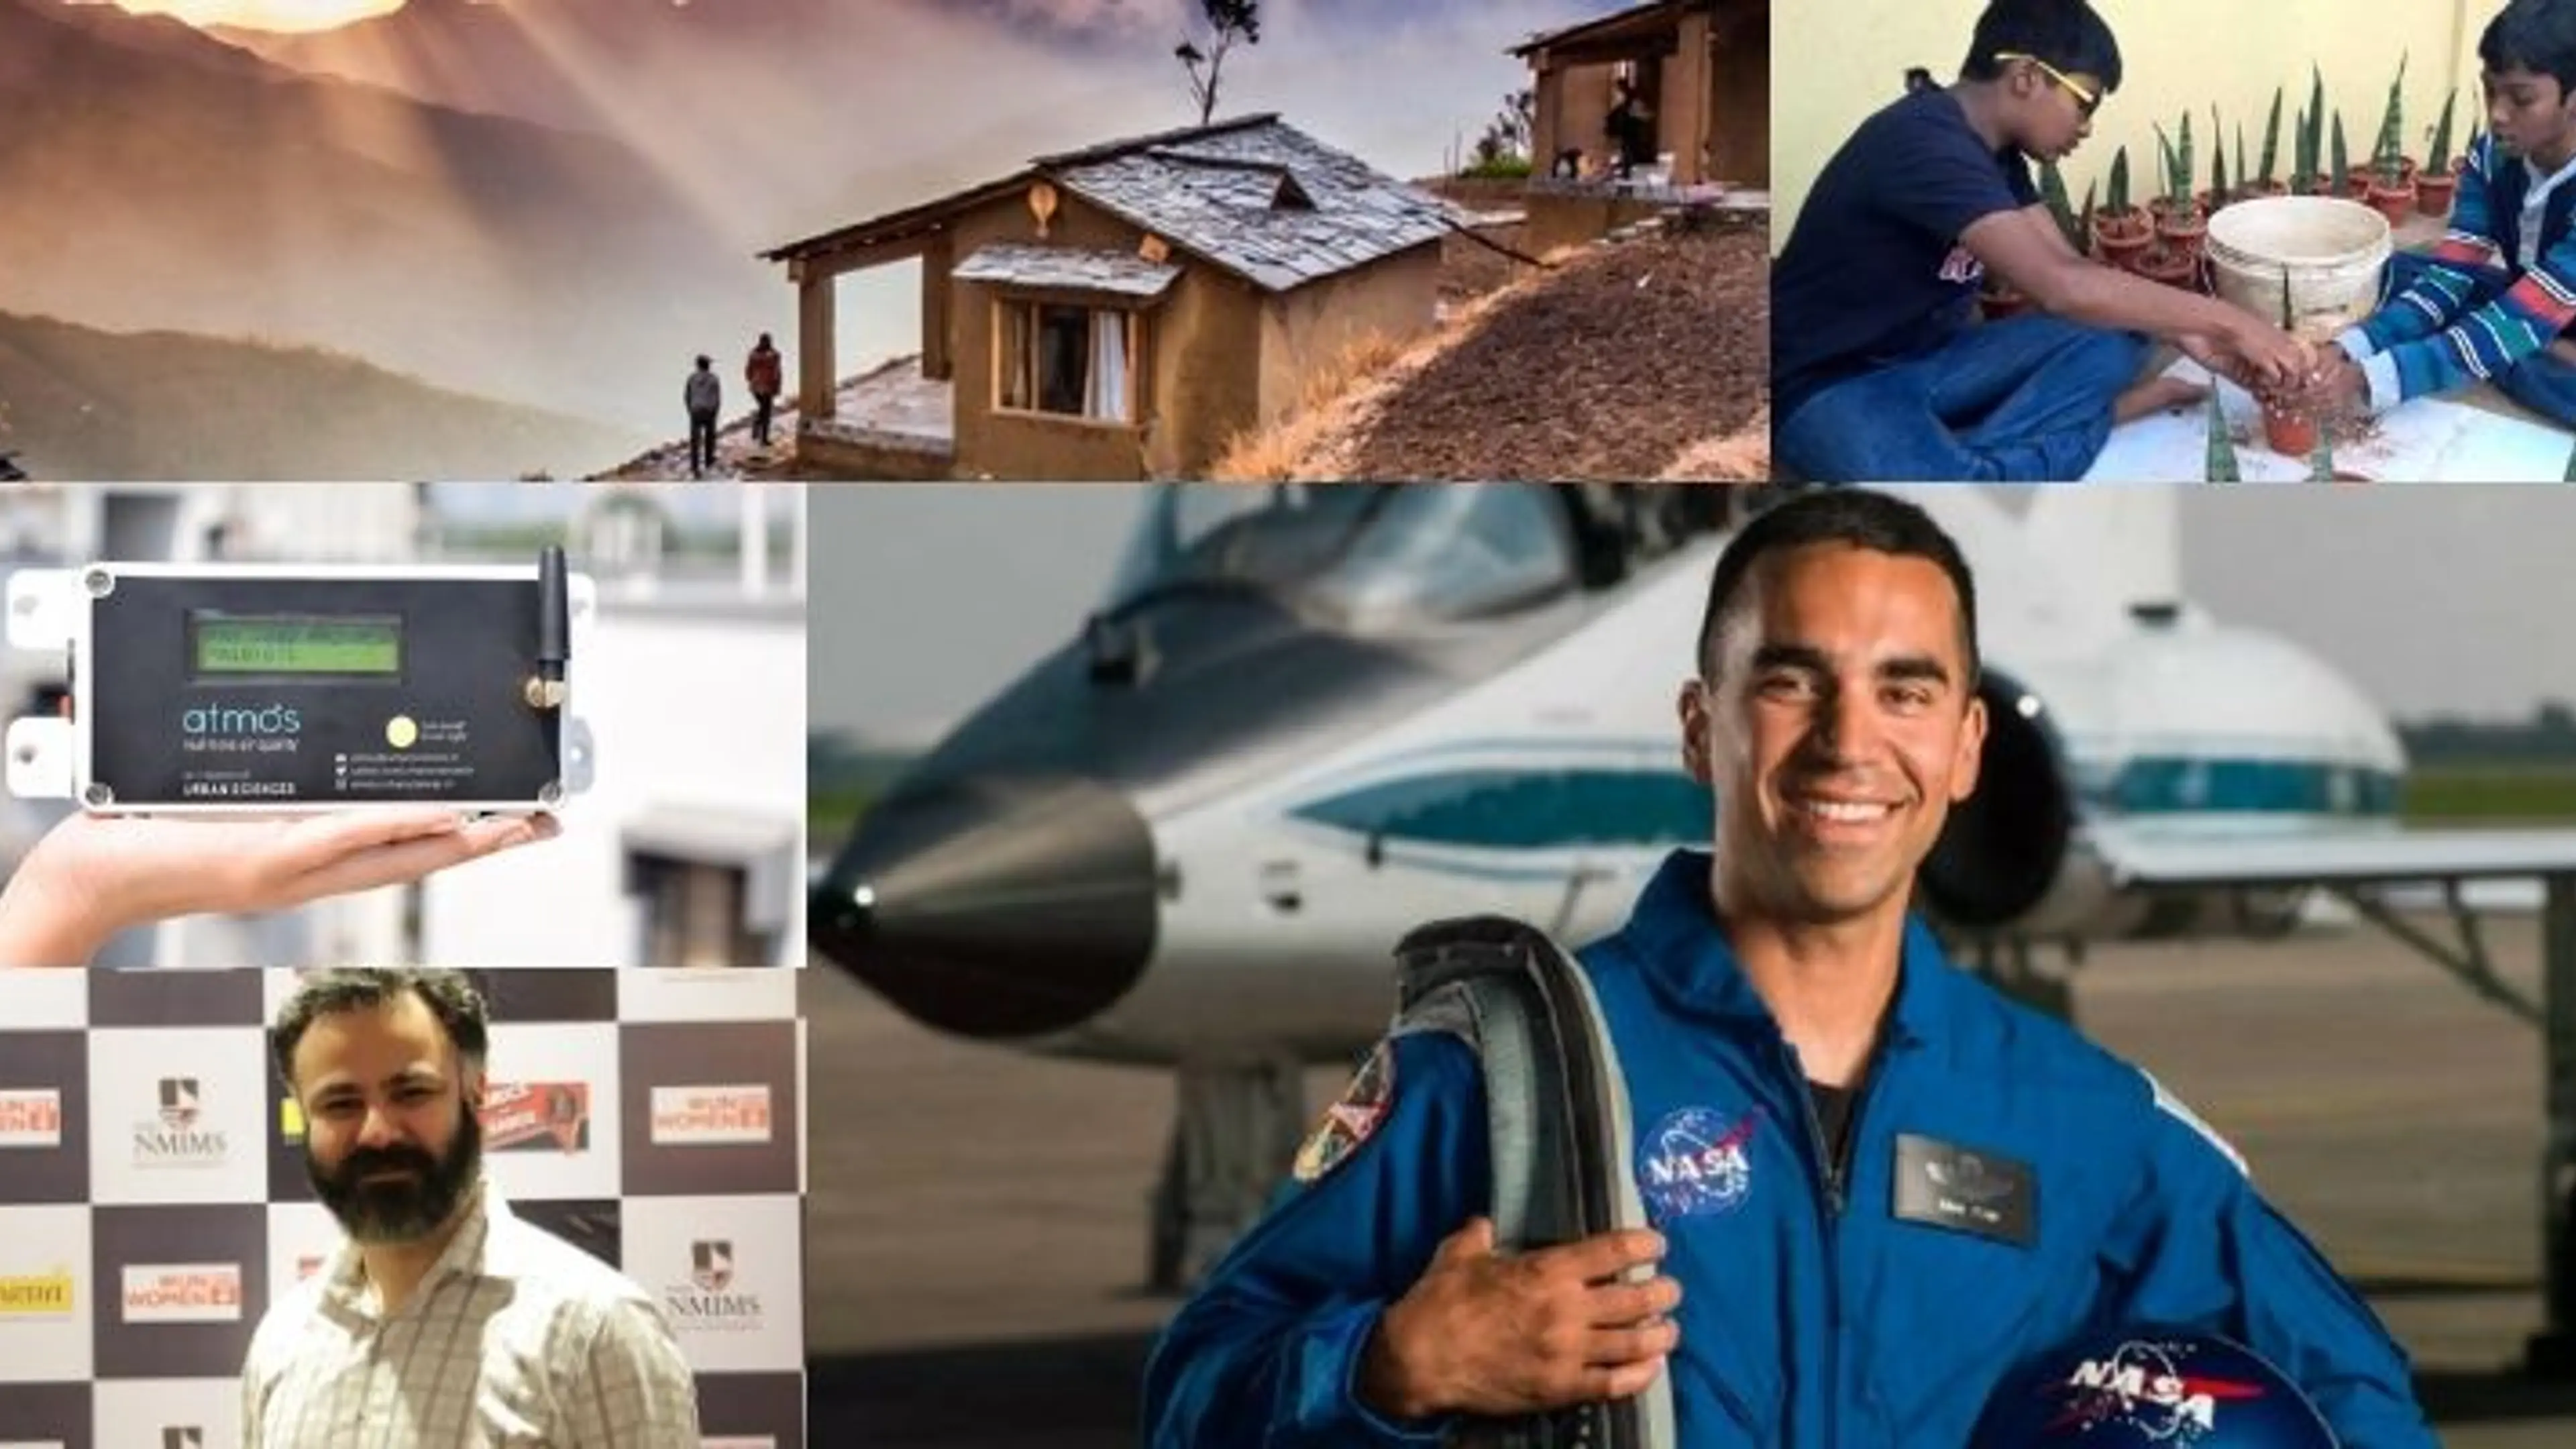 From an Indian-American selected for NASA’s mission to Moon, Mars to breathing fresh air, here are the top social stories this week